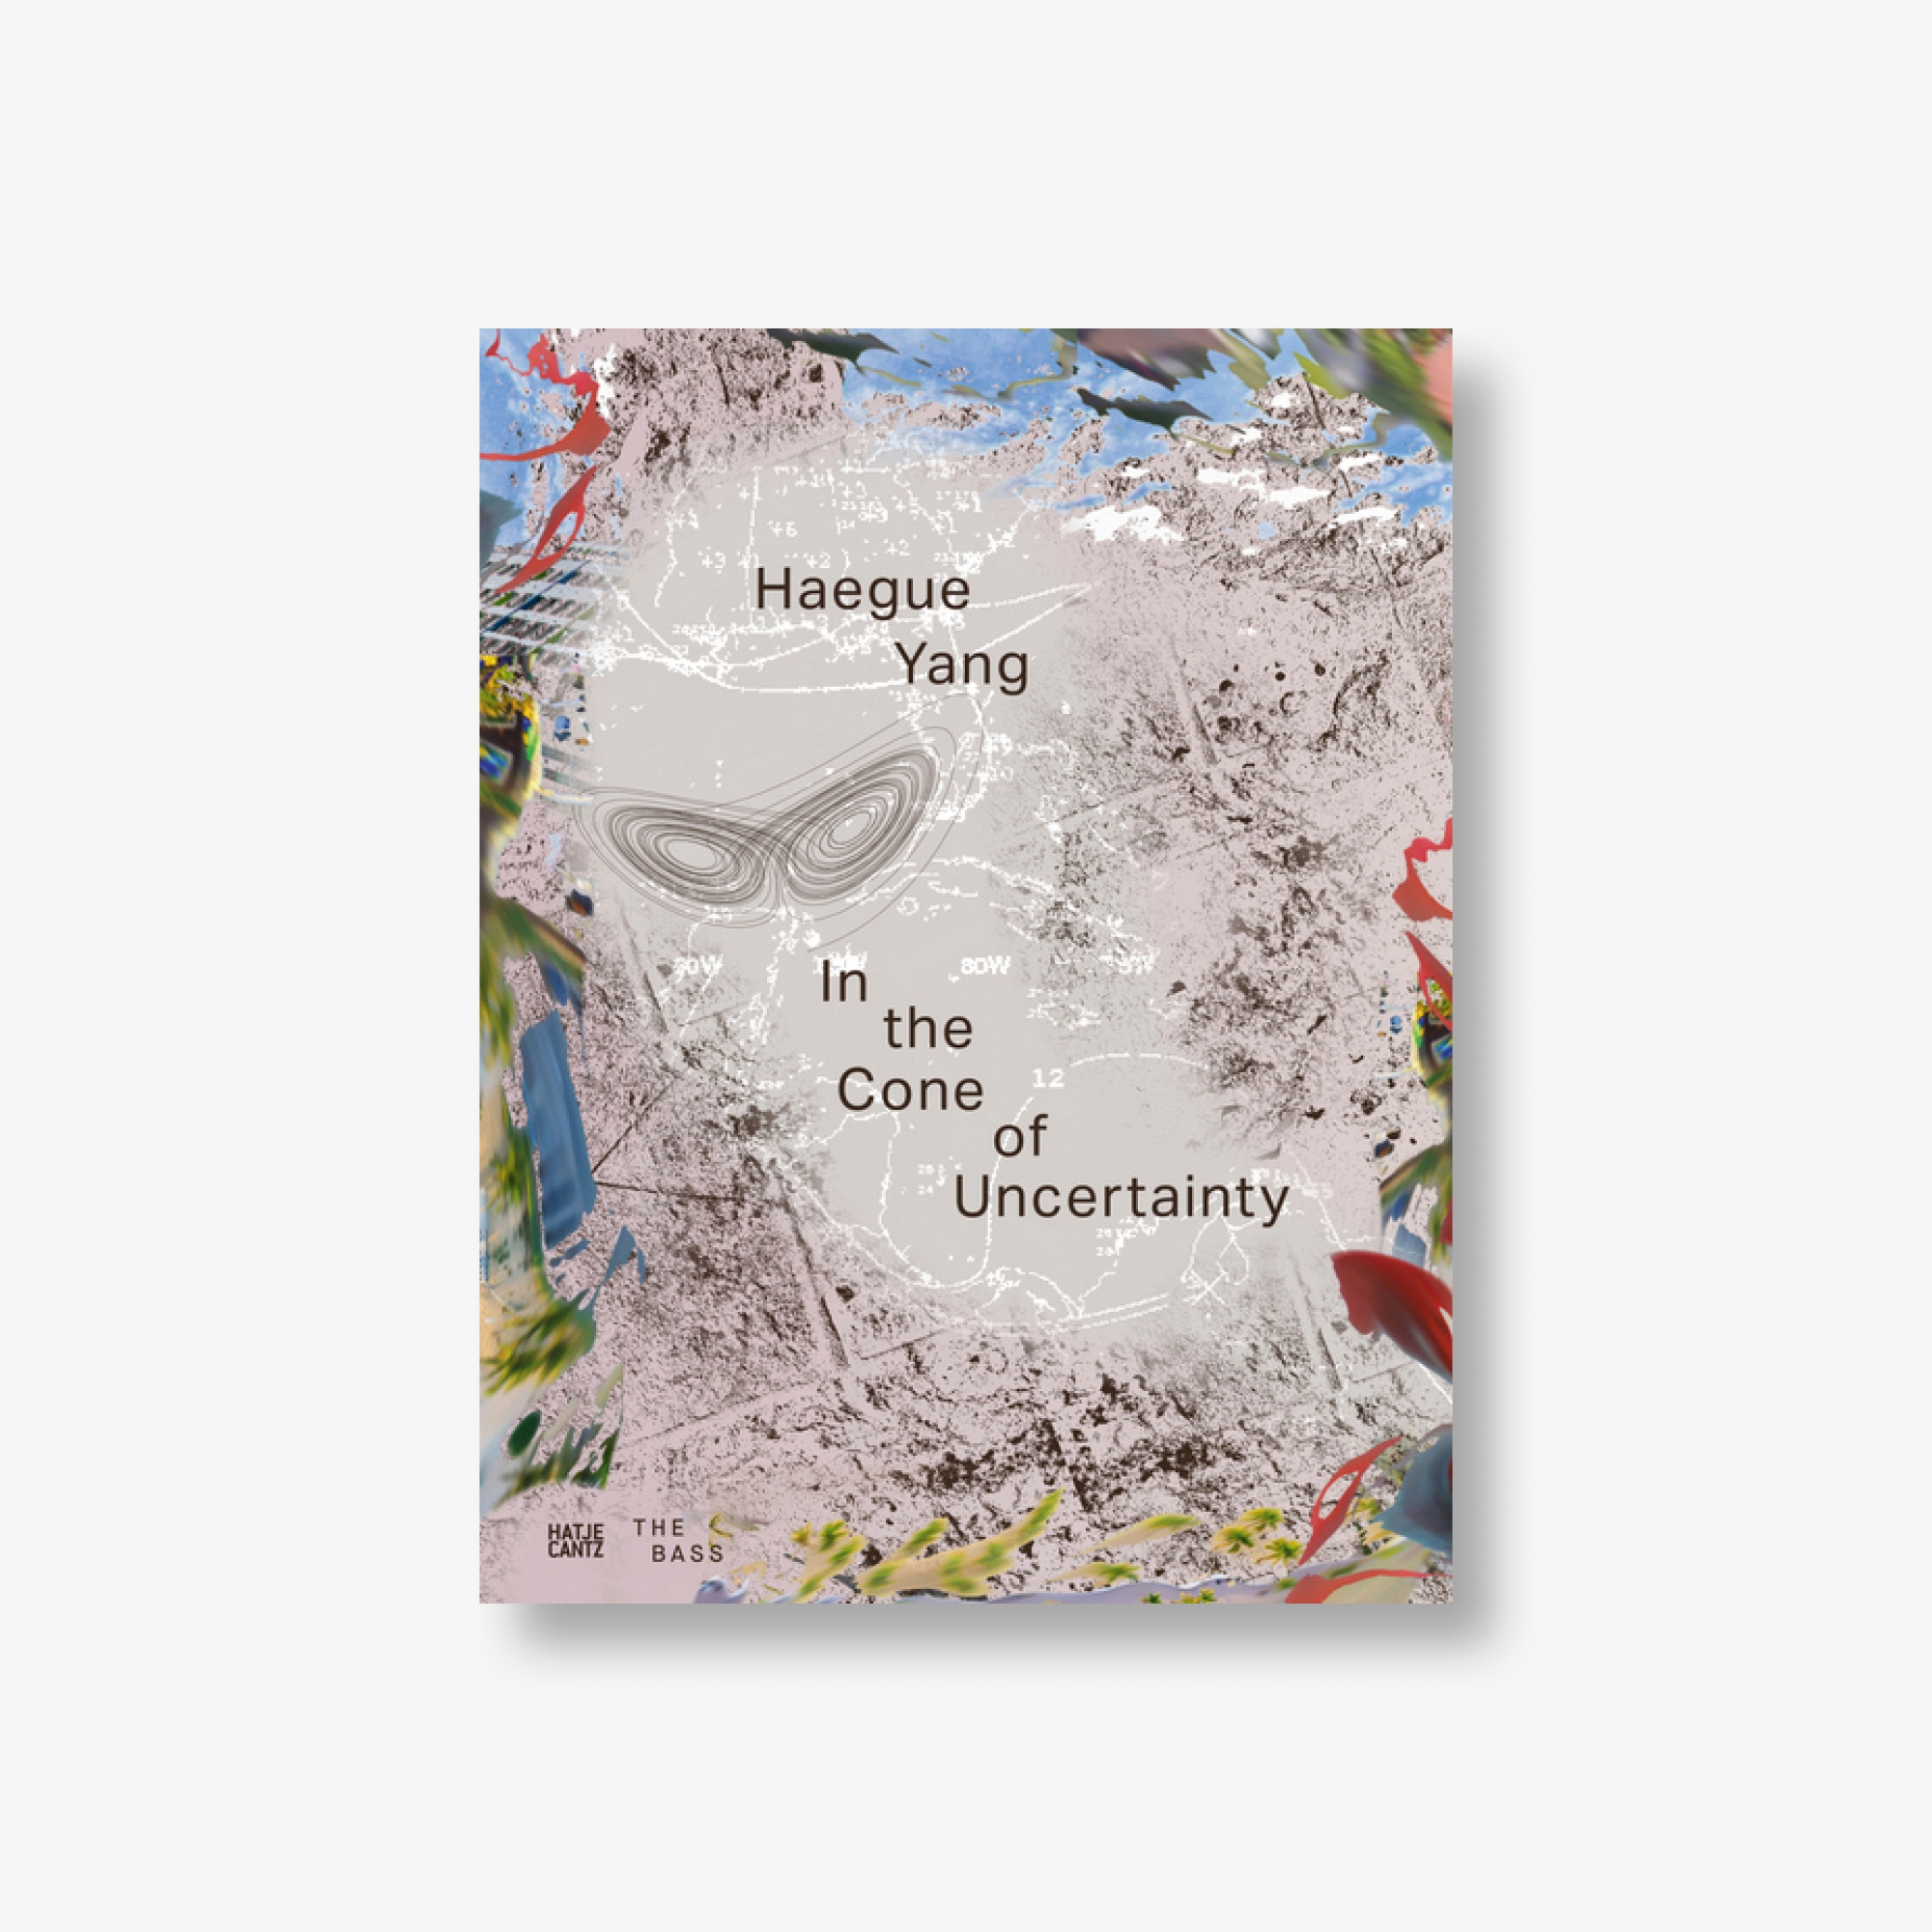 Haegue Yang: In the Cone of Uncertainty